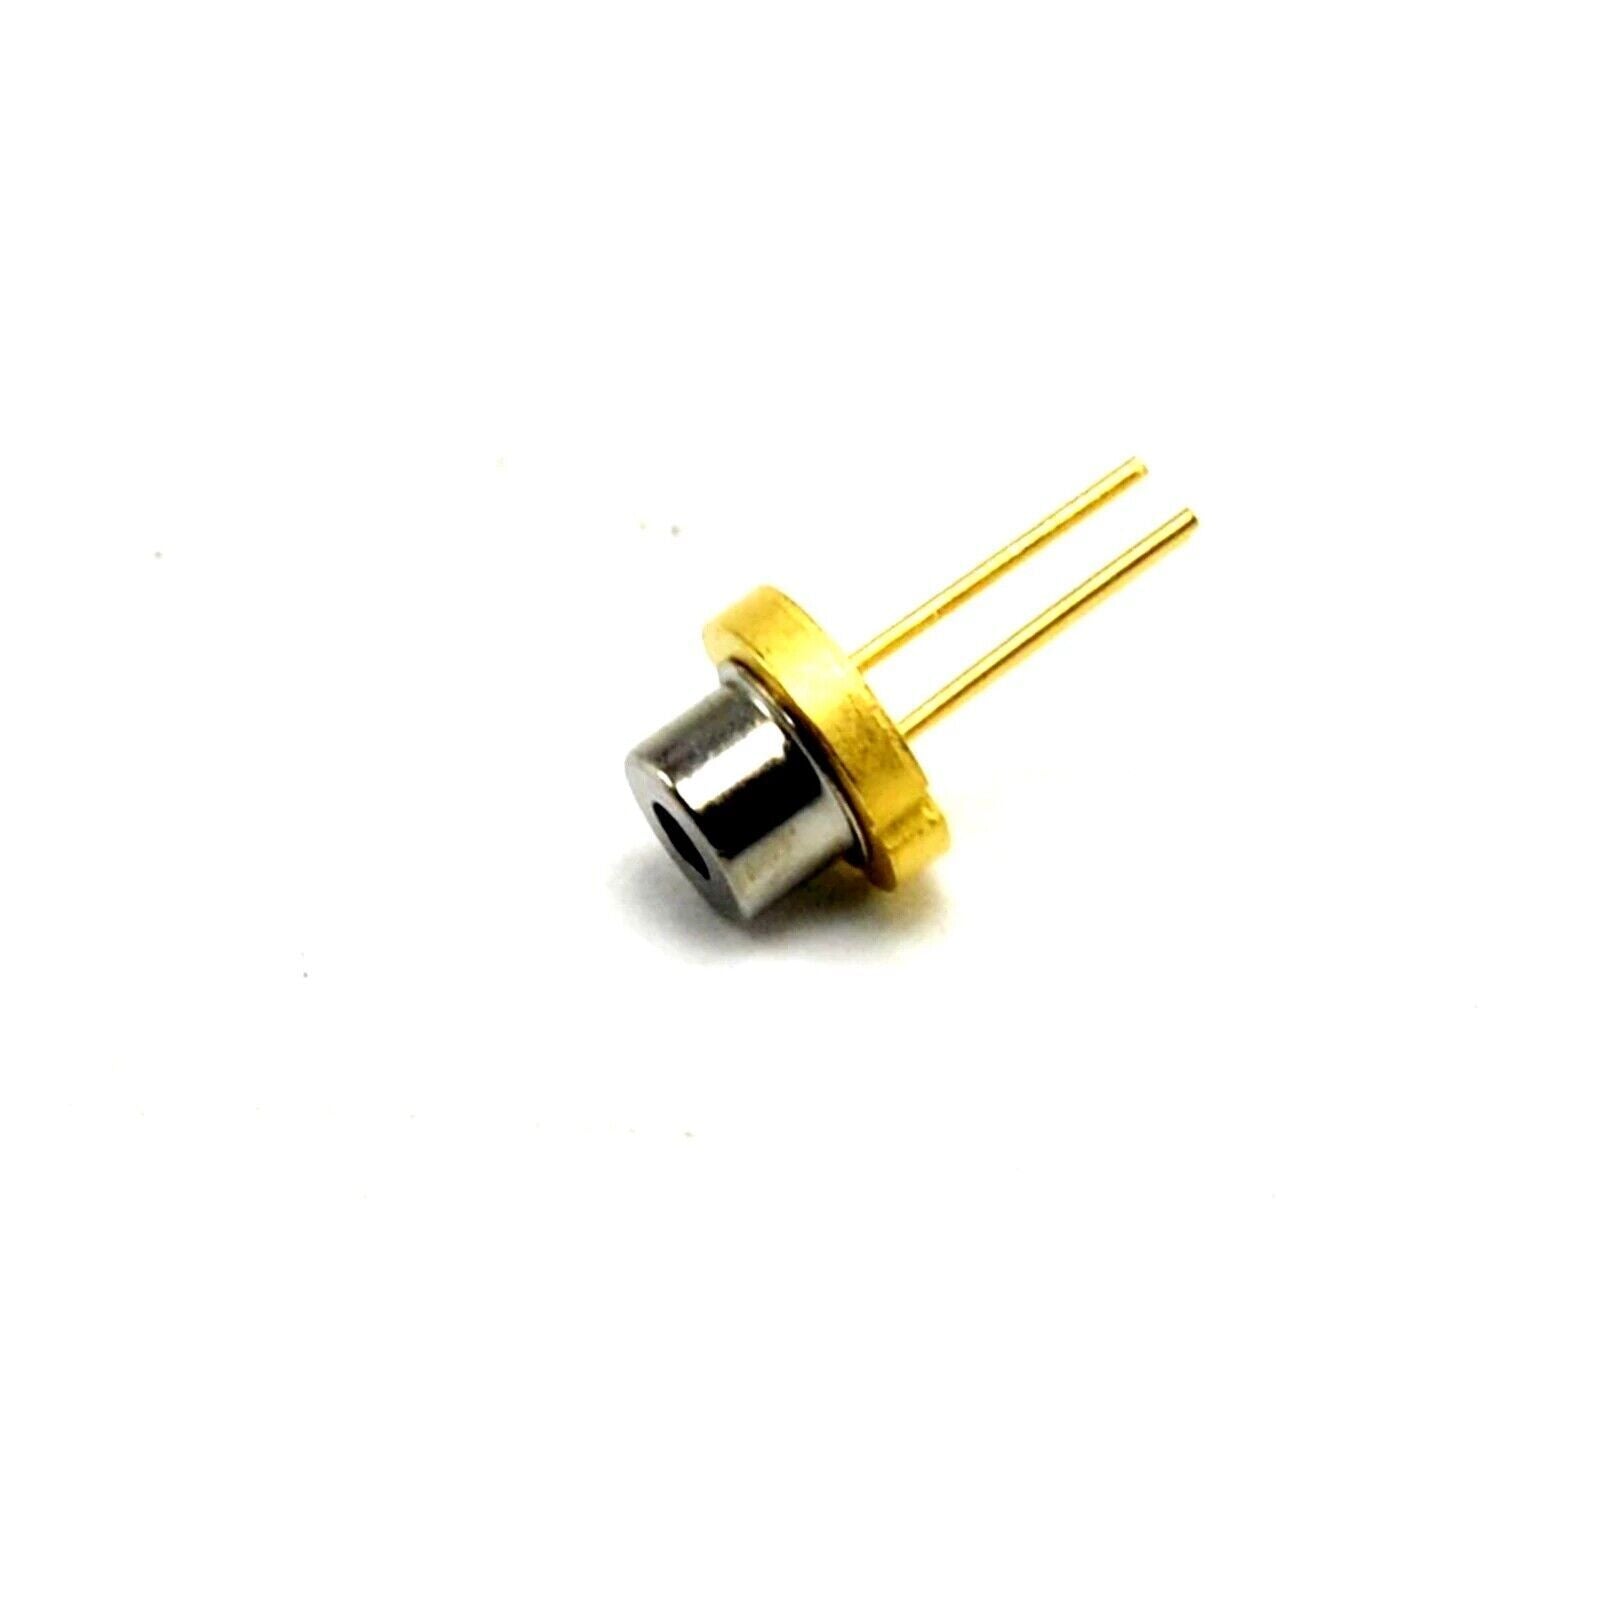 Ushio HL6501MG-A 658nm 35mw Red Laser Diode